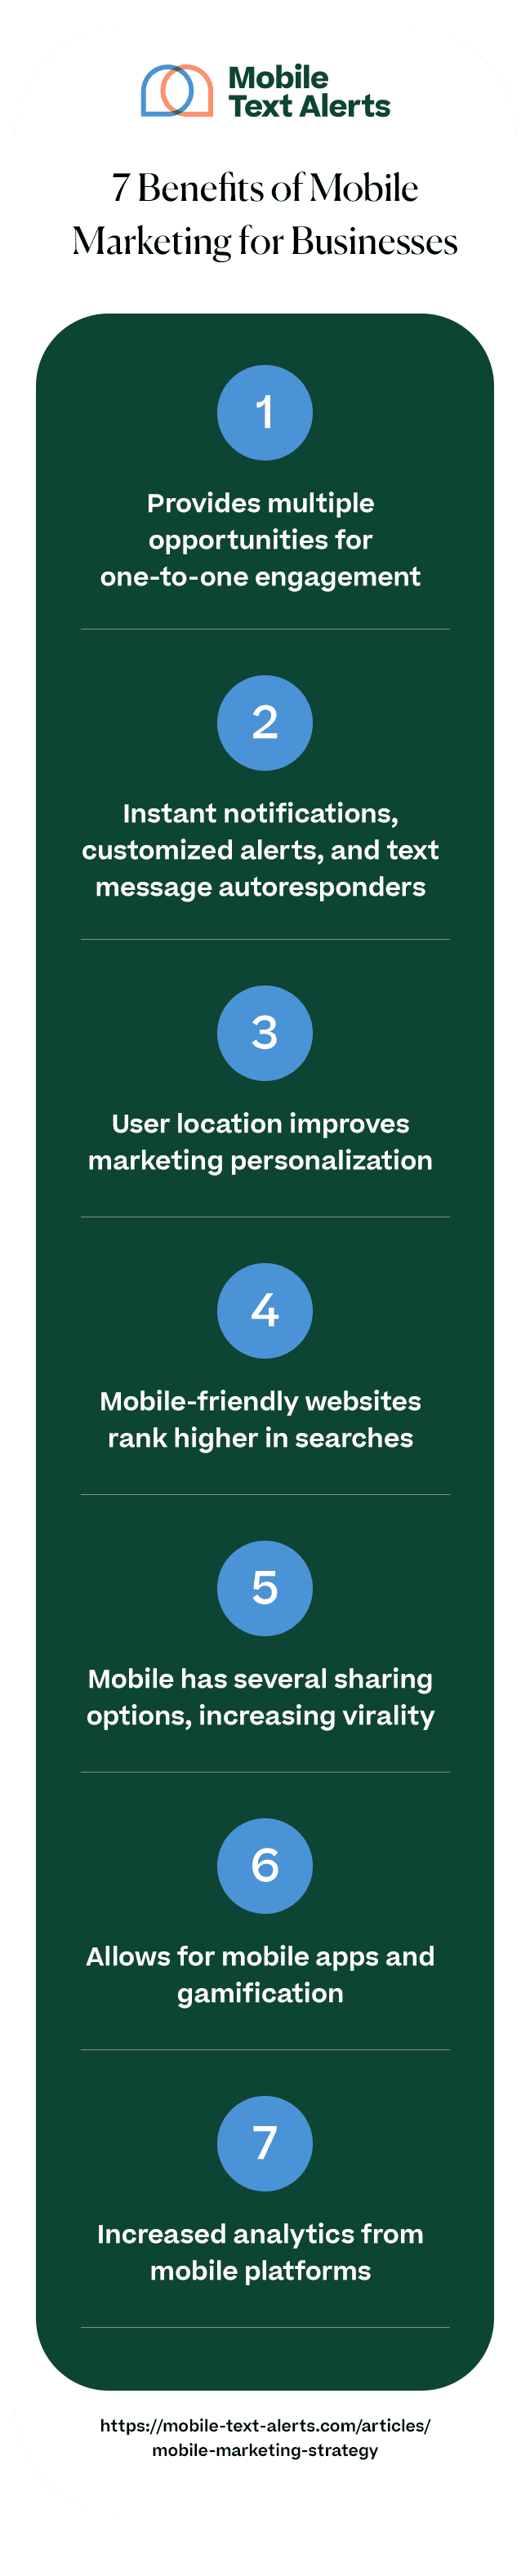 7 Benefits of Mobile Marketing